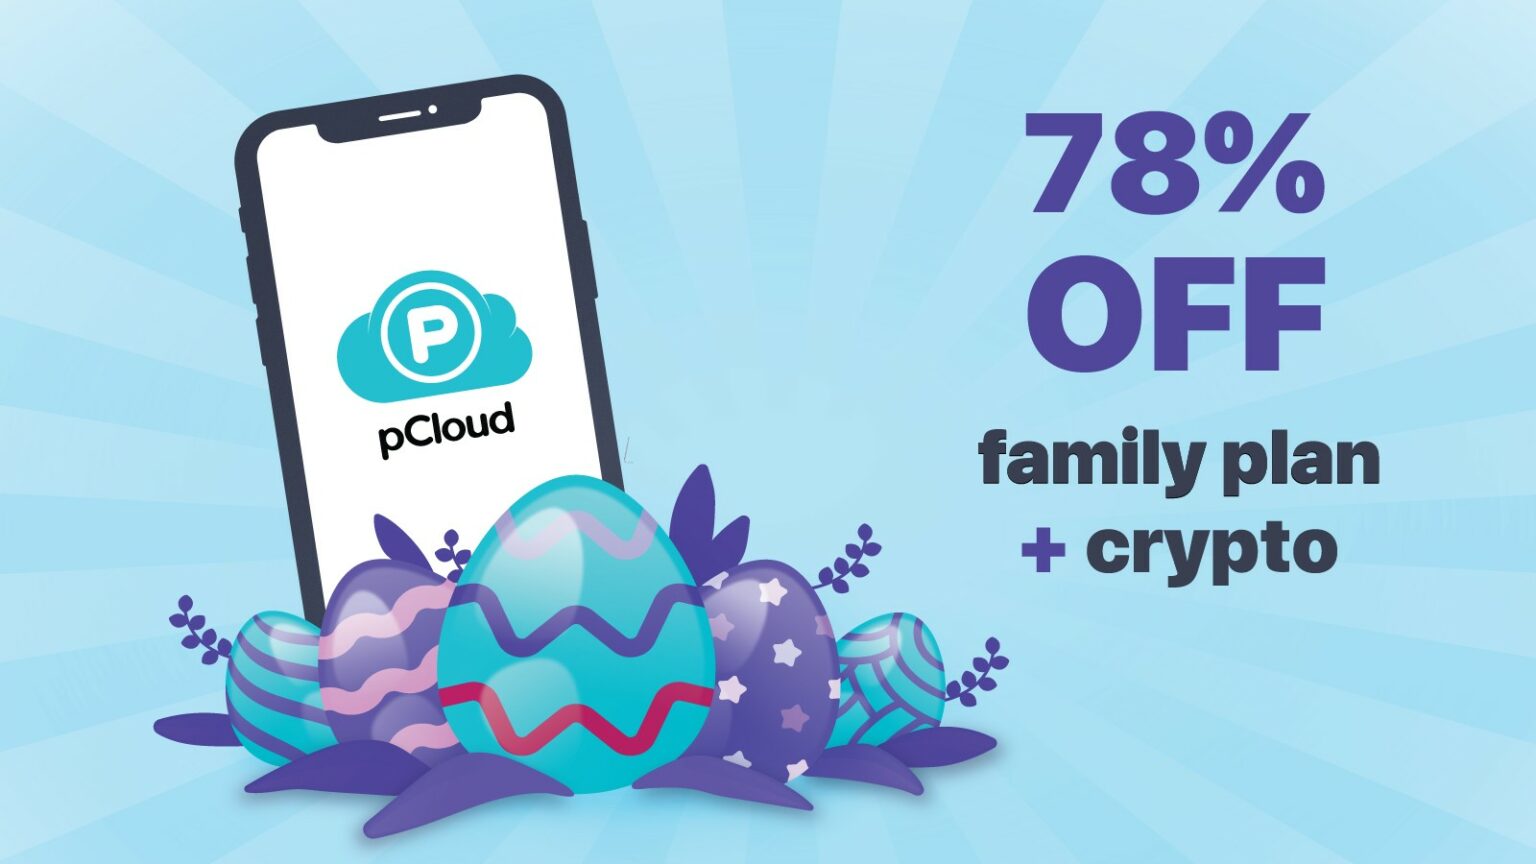 pCloud's Easter promotion gives you a great deal on a family plan.